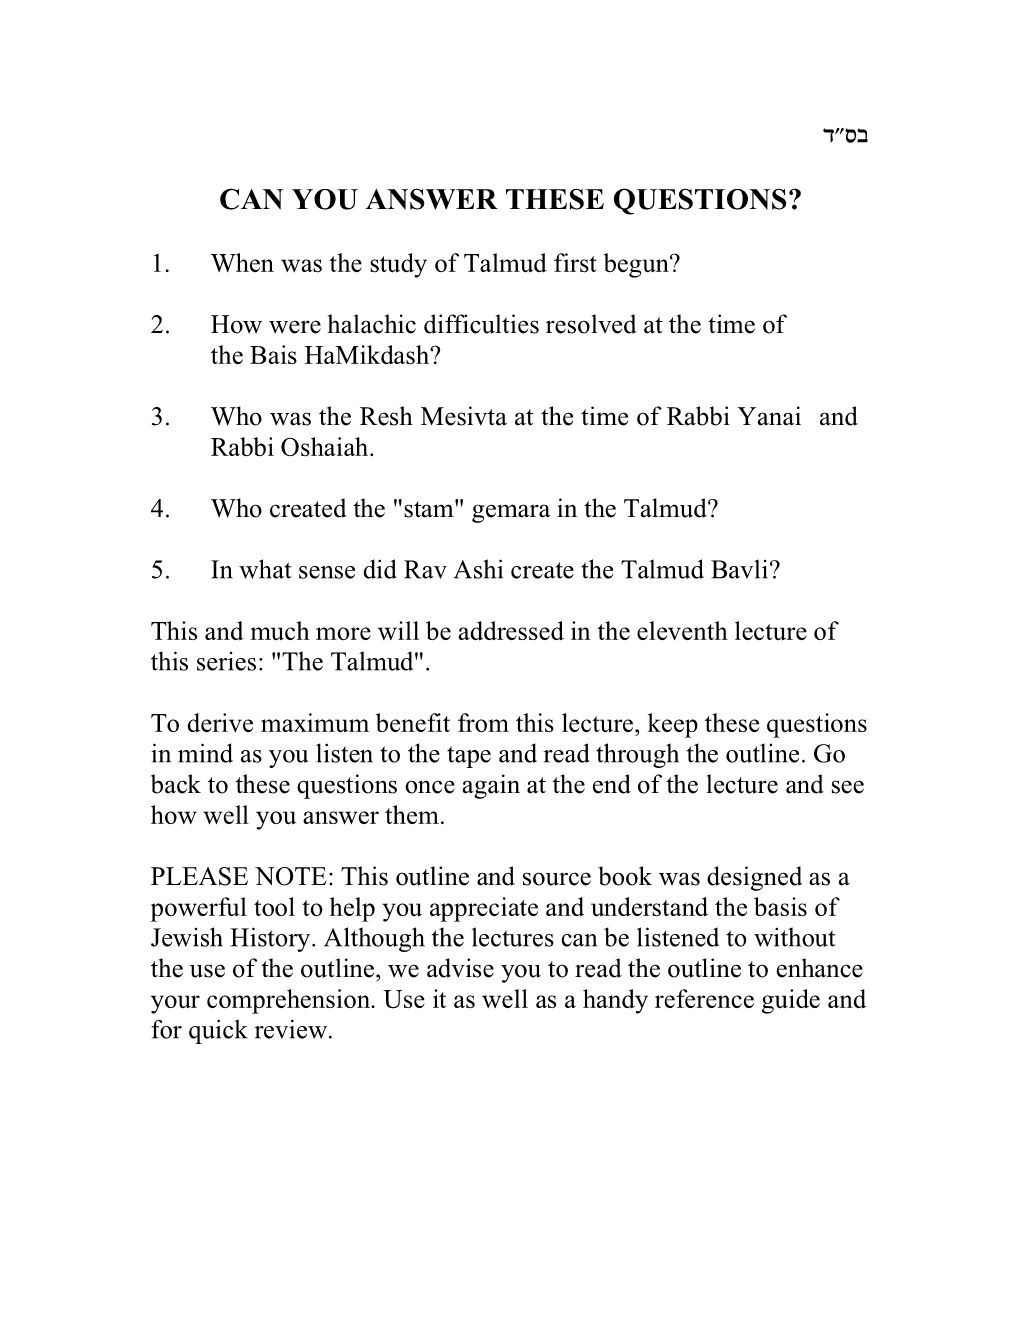 Can You Answer These Questions?